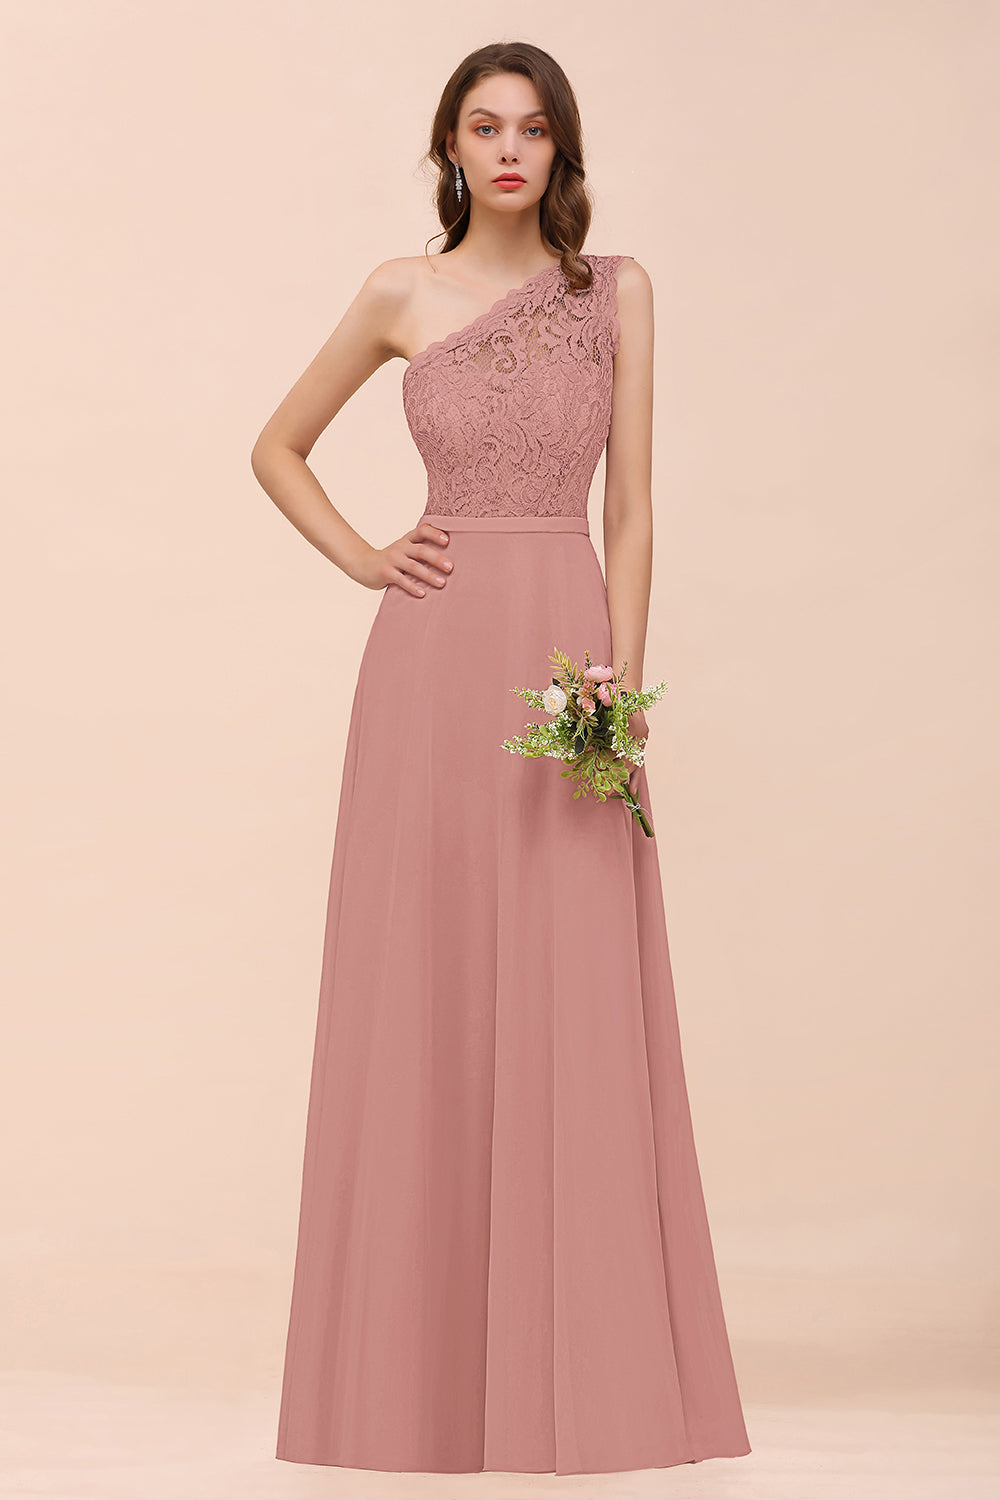 New Arrival Dusty Rose One Shoulder Lace Long Bridesmaid Dress-27dress